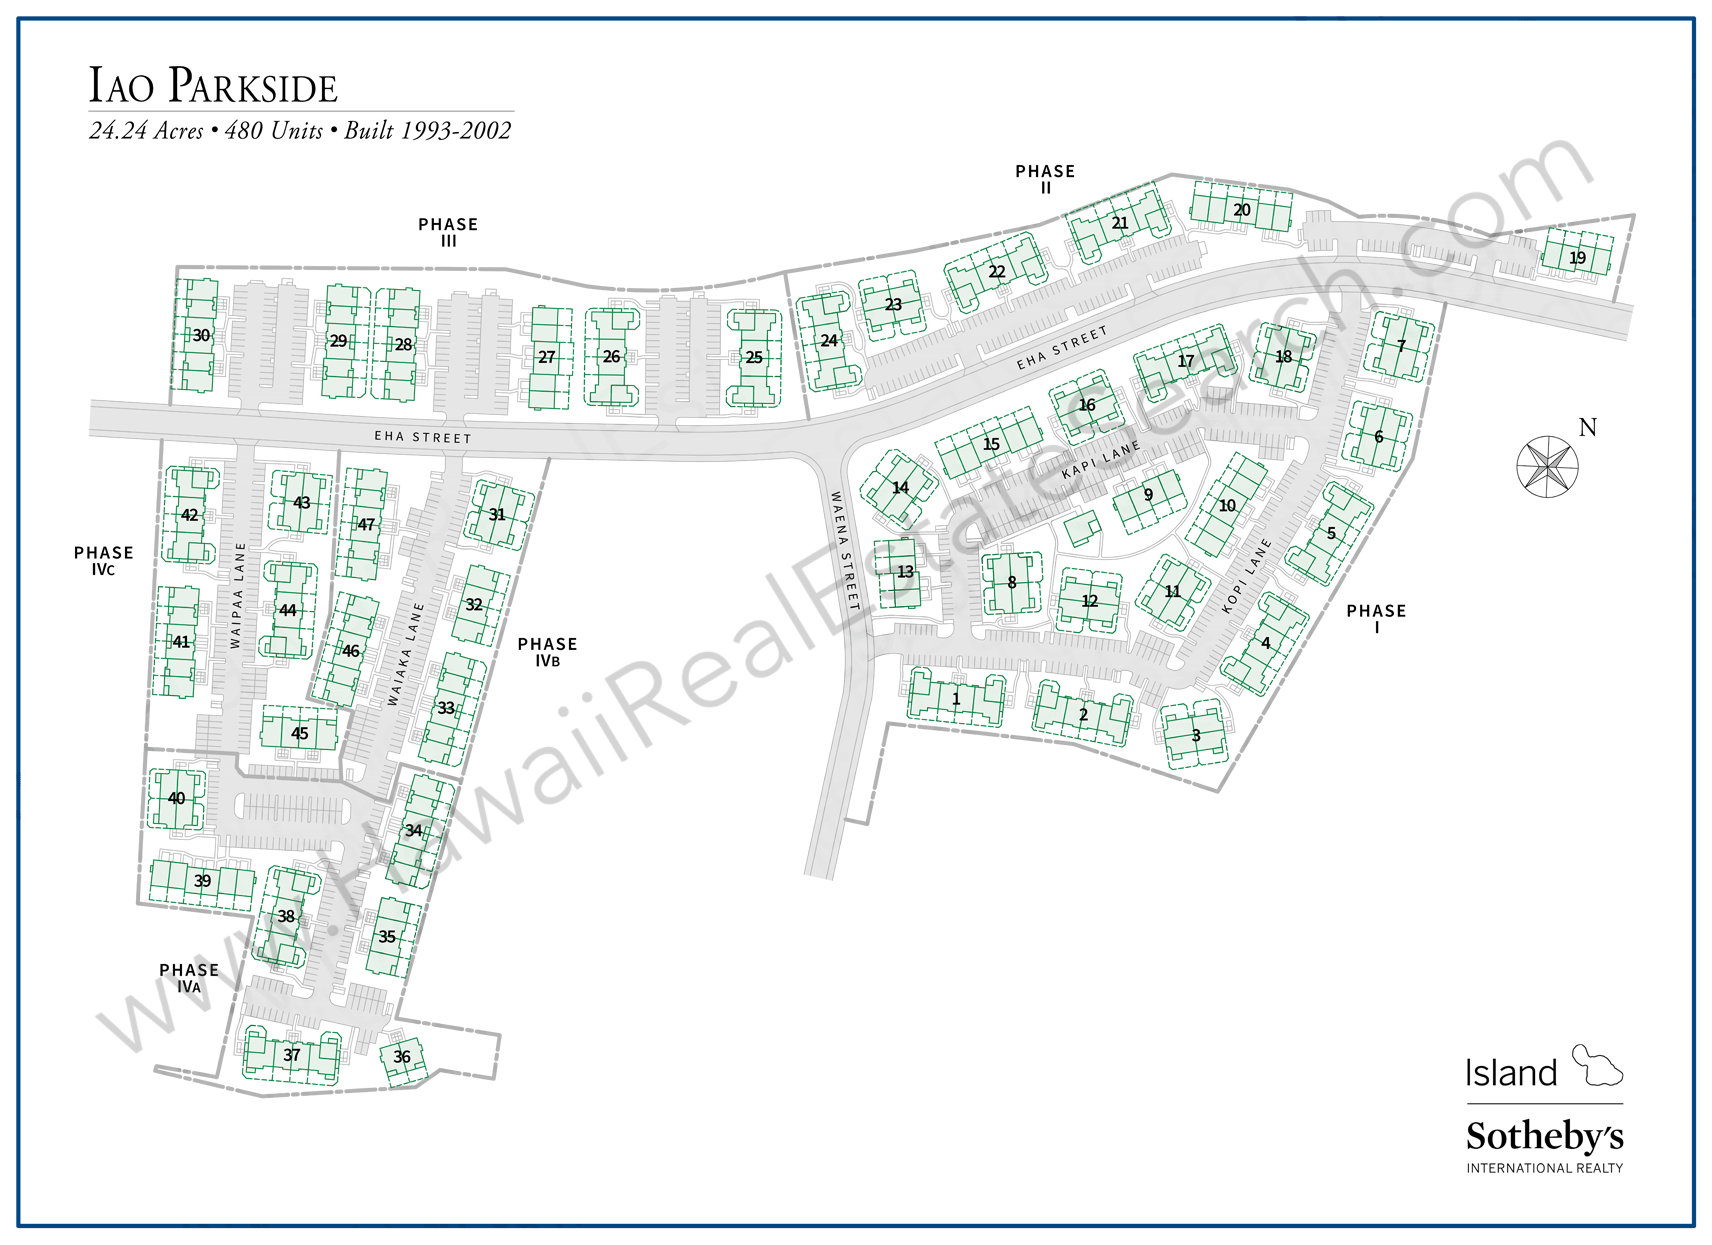 Iao Parkside Property Map Updated